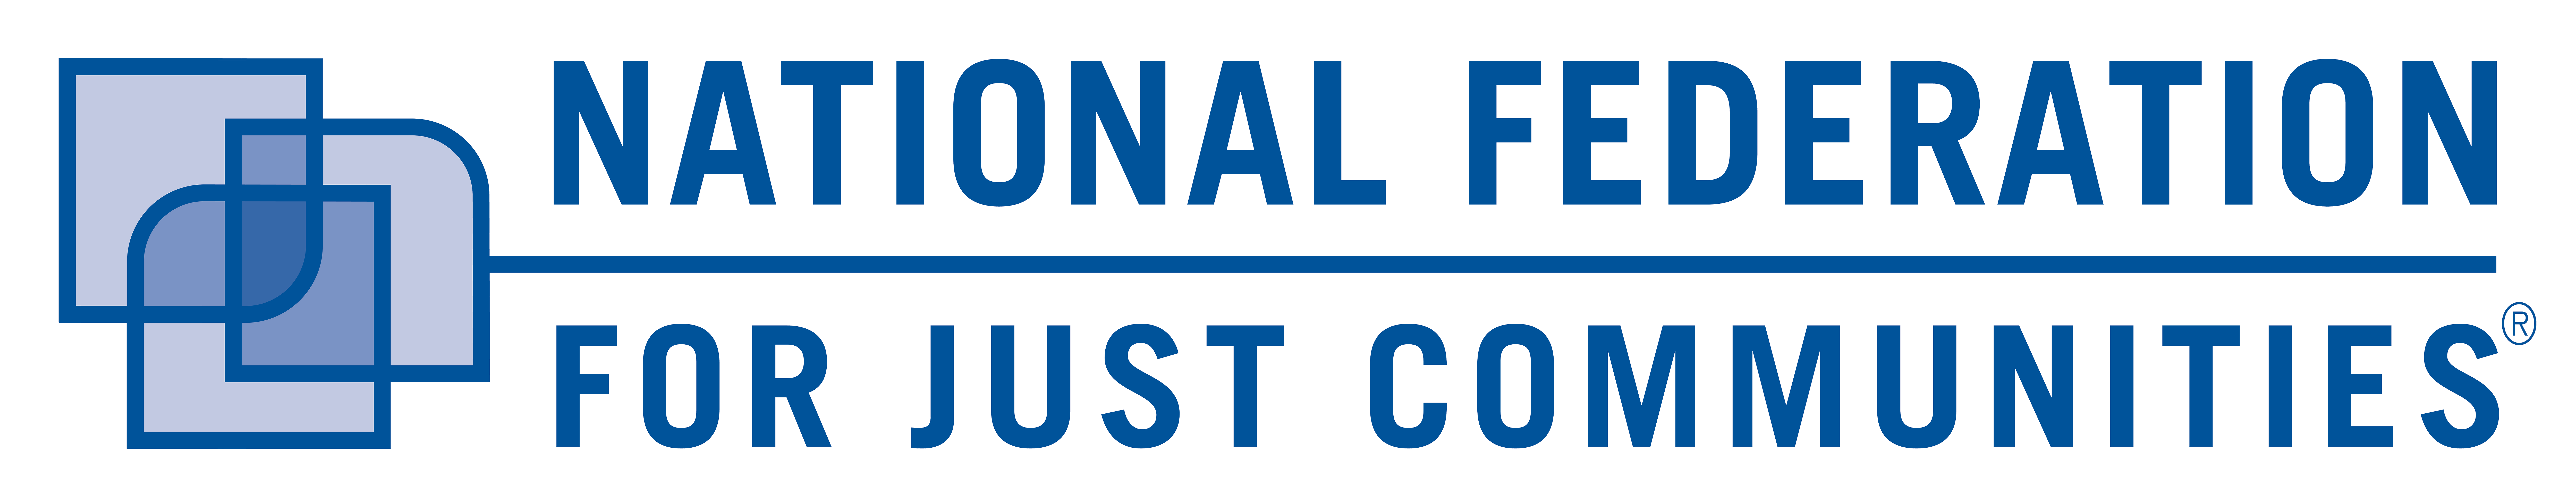 National Federation for Just Communities